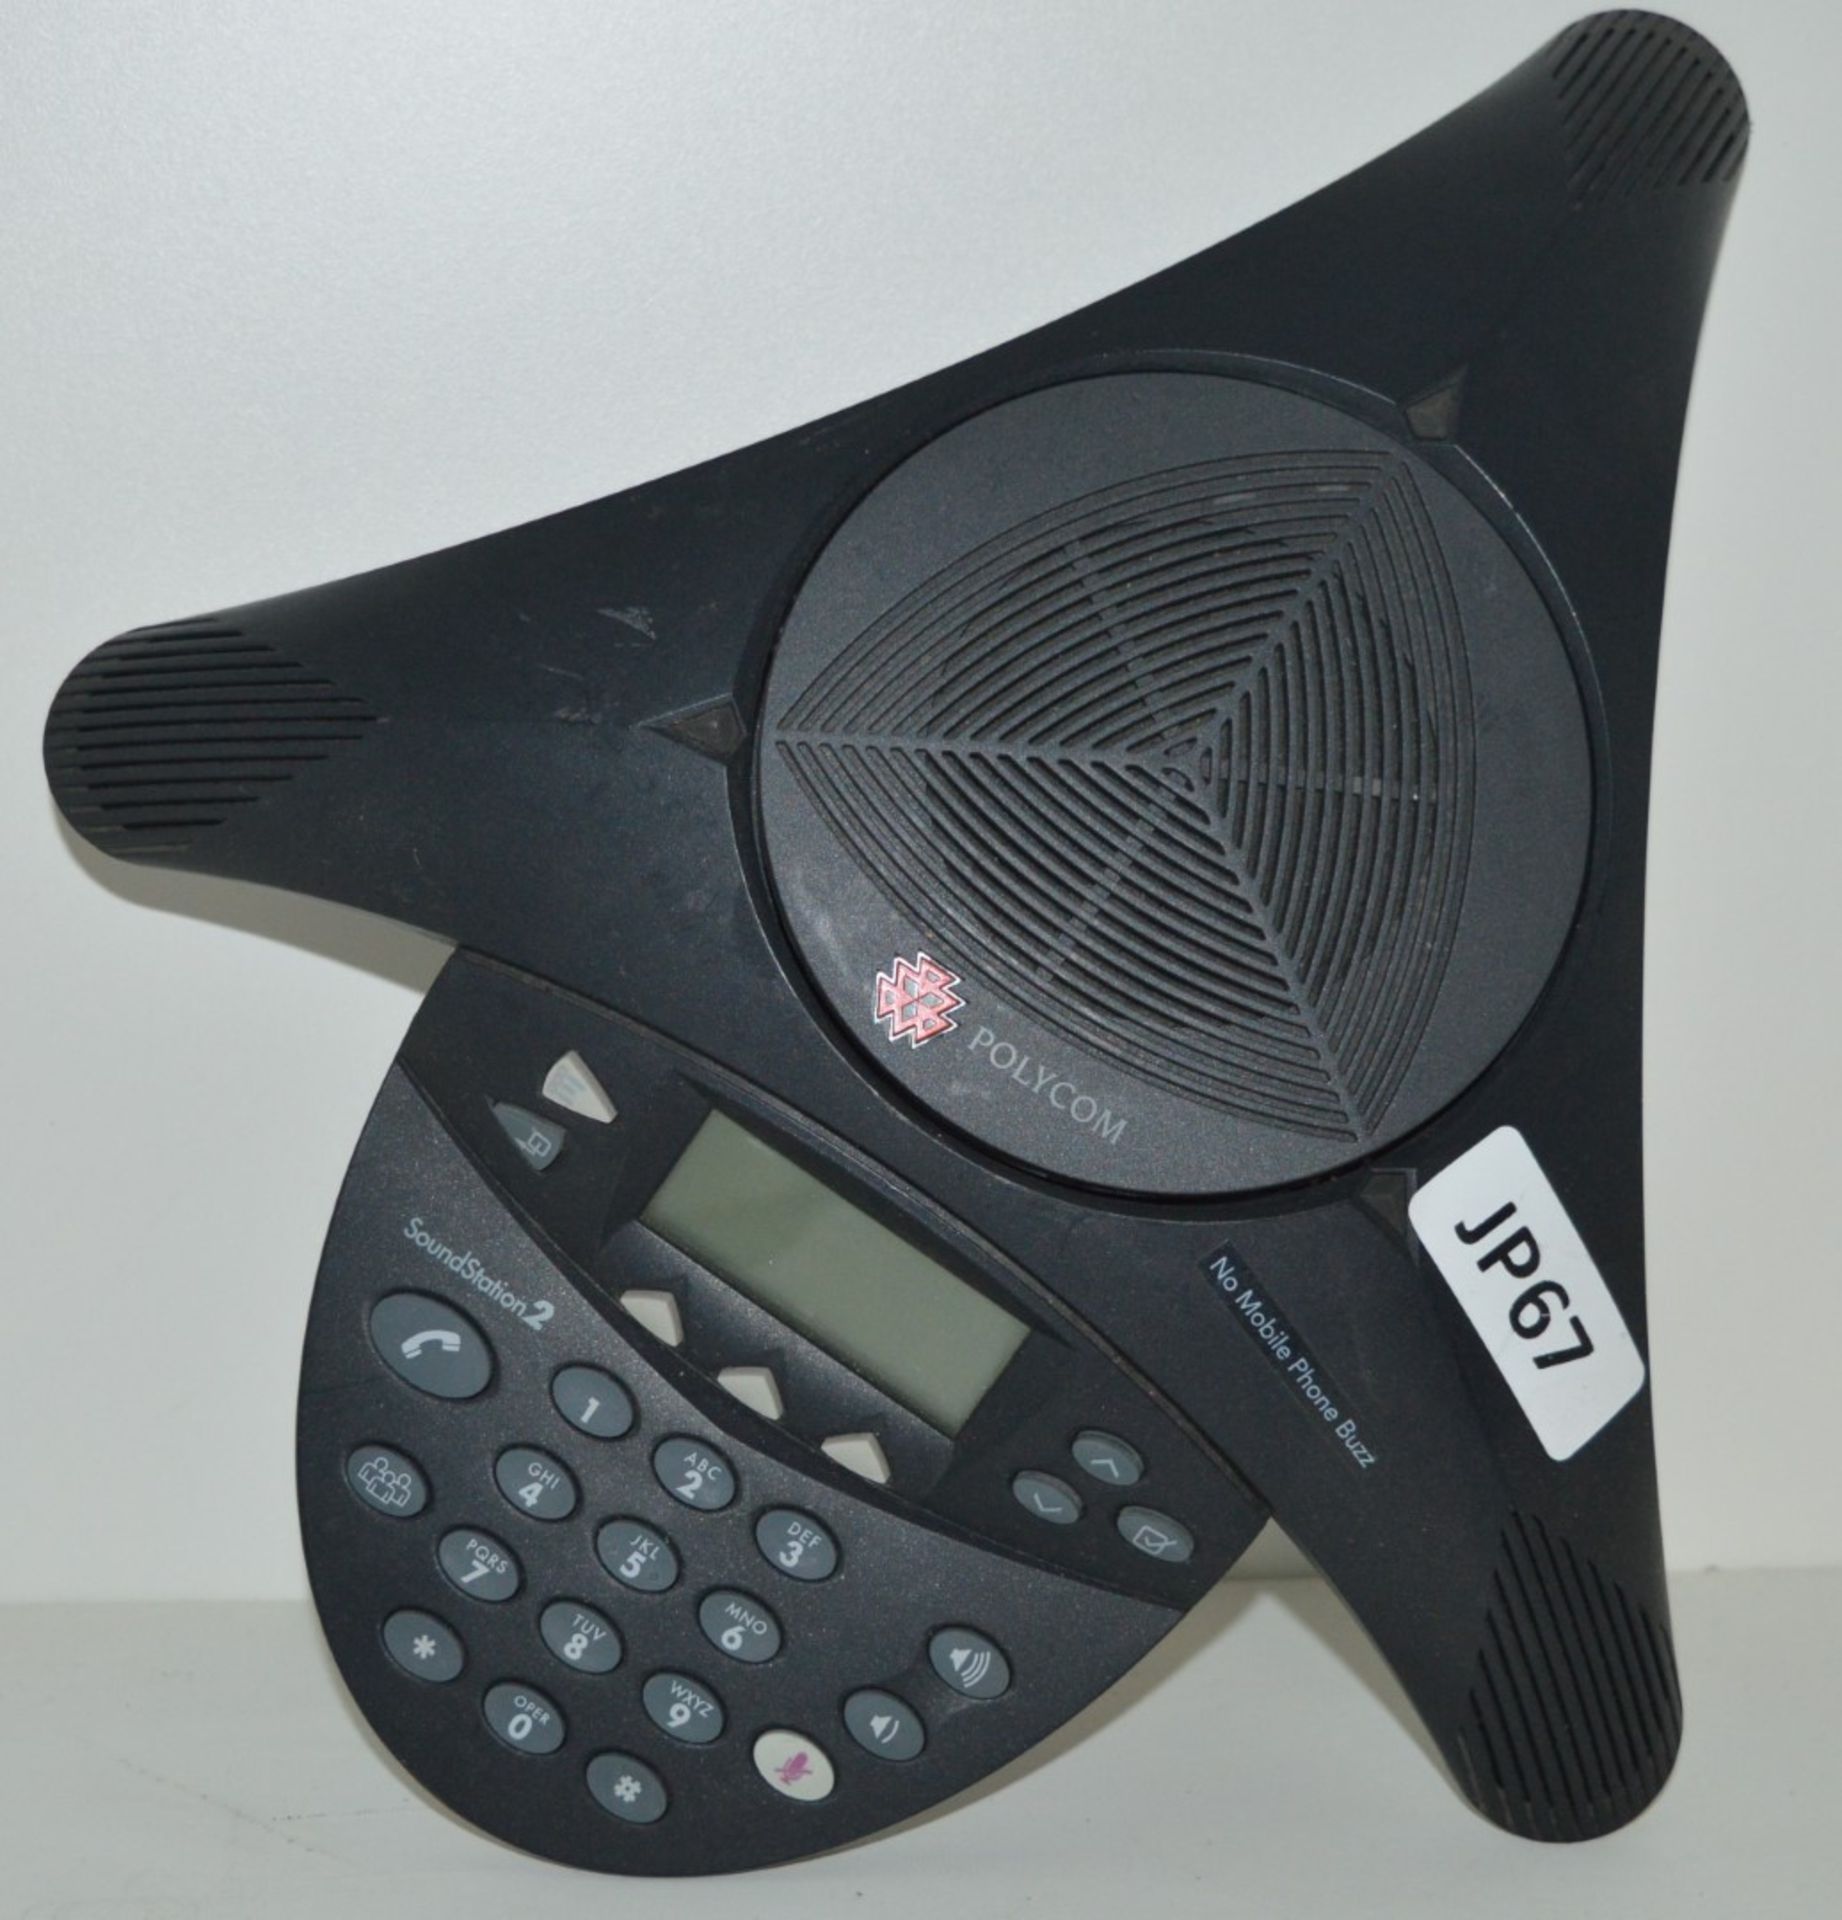 1 x Polycome Soundstation 2 Confernce Phone With Power Module - Ref JP67 - CL011 - Location: